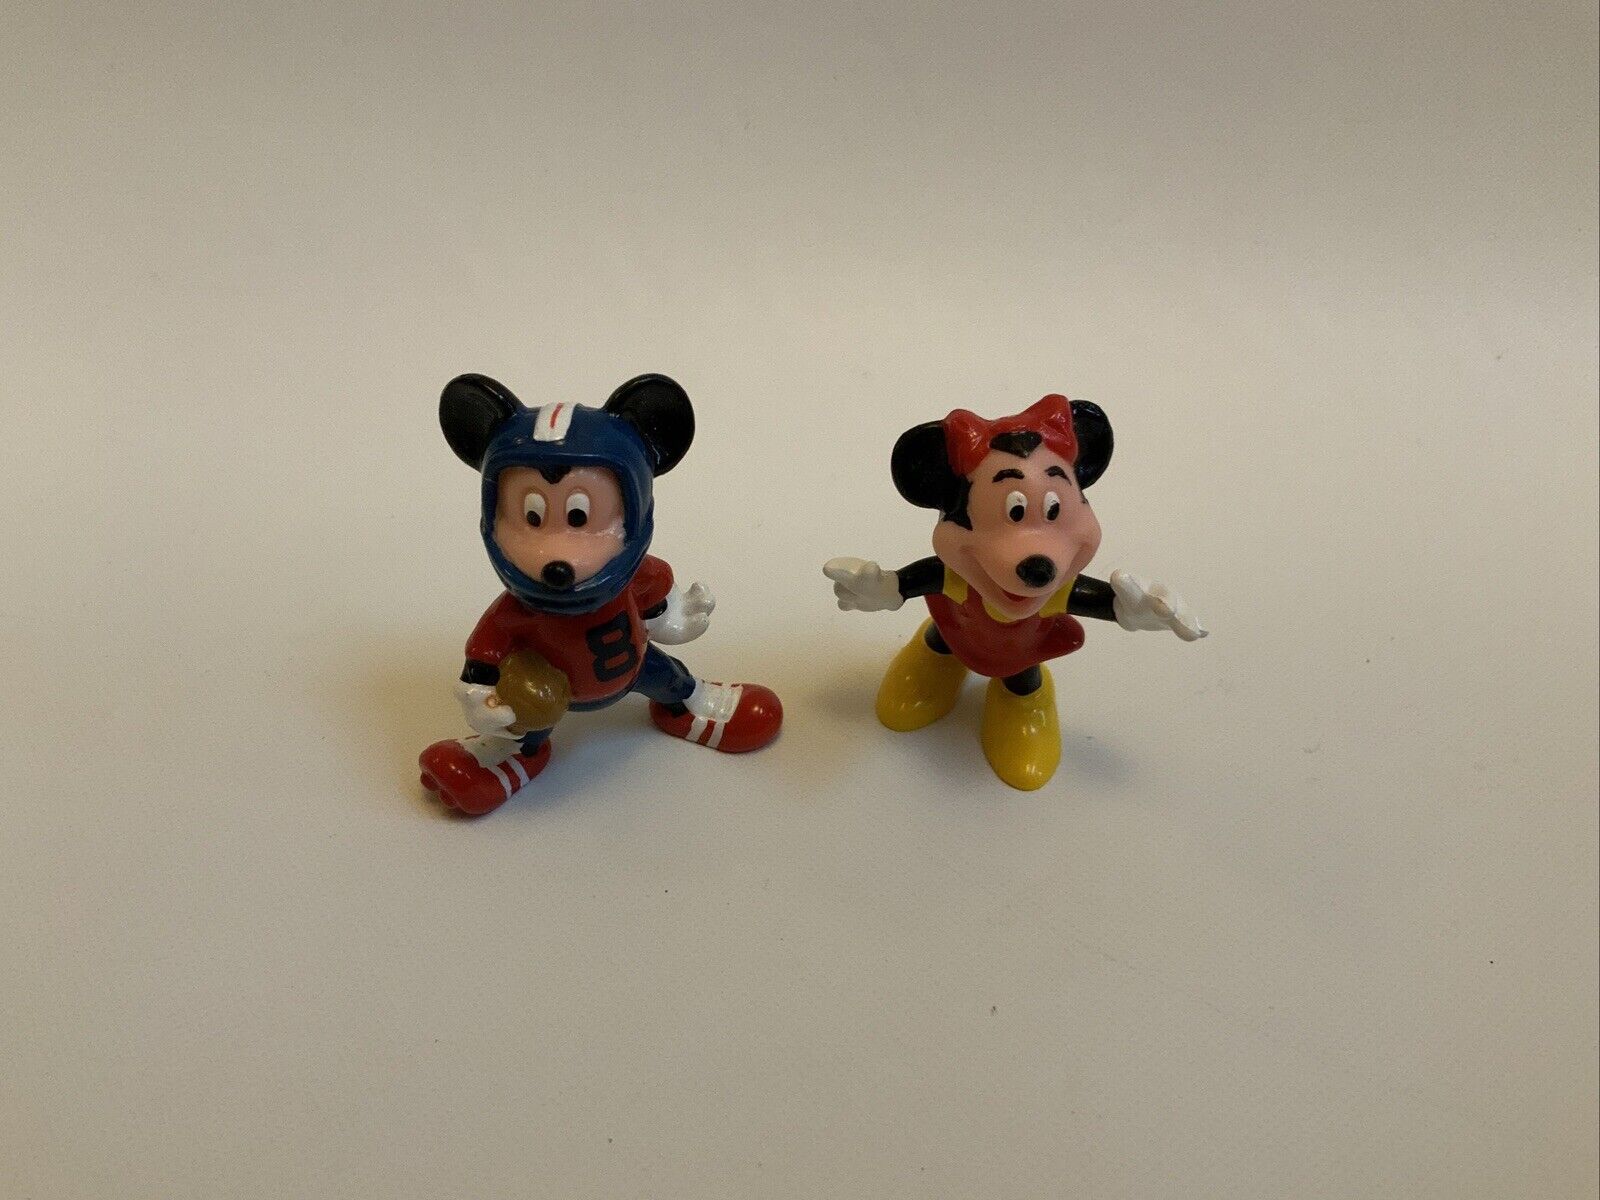 Rare Vintage 2” Disney Applause Mickey & Mini Mouse Figurines From Hong Kong